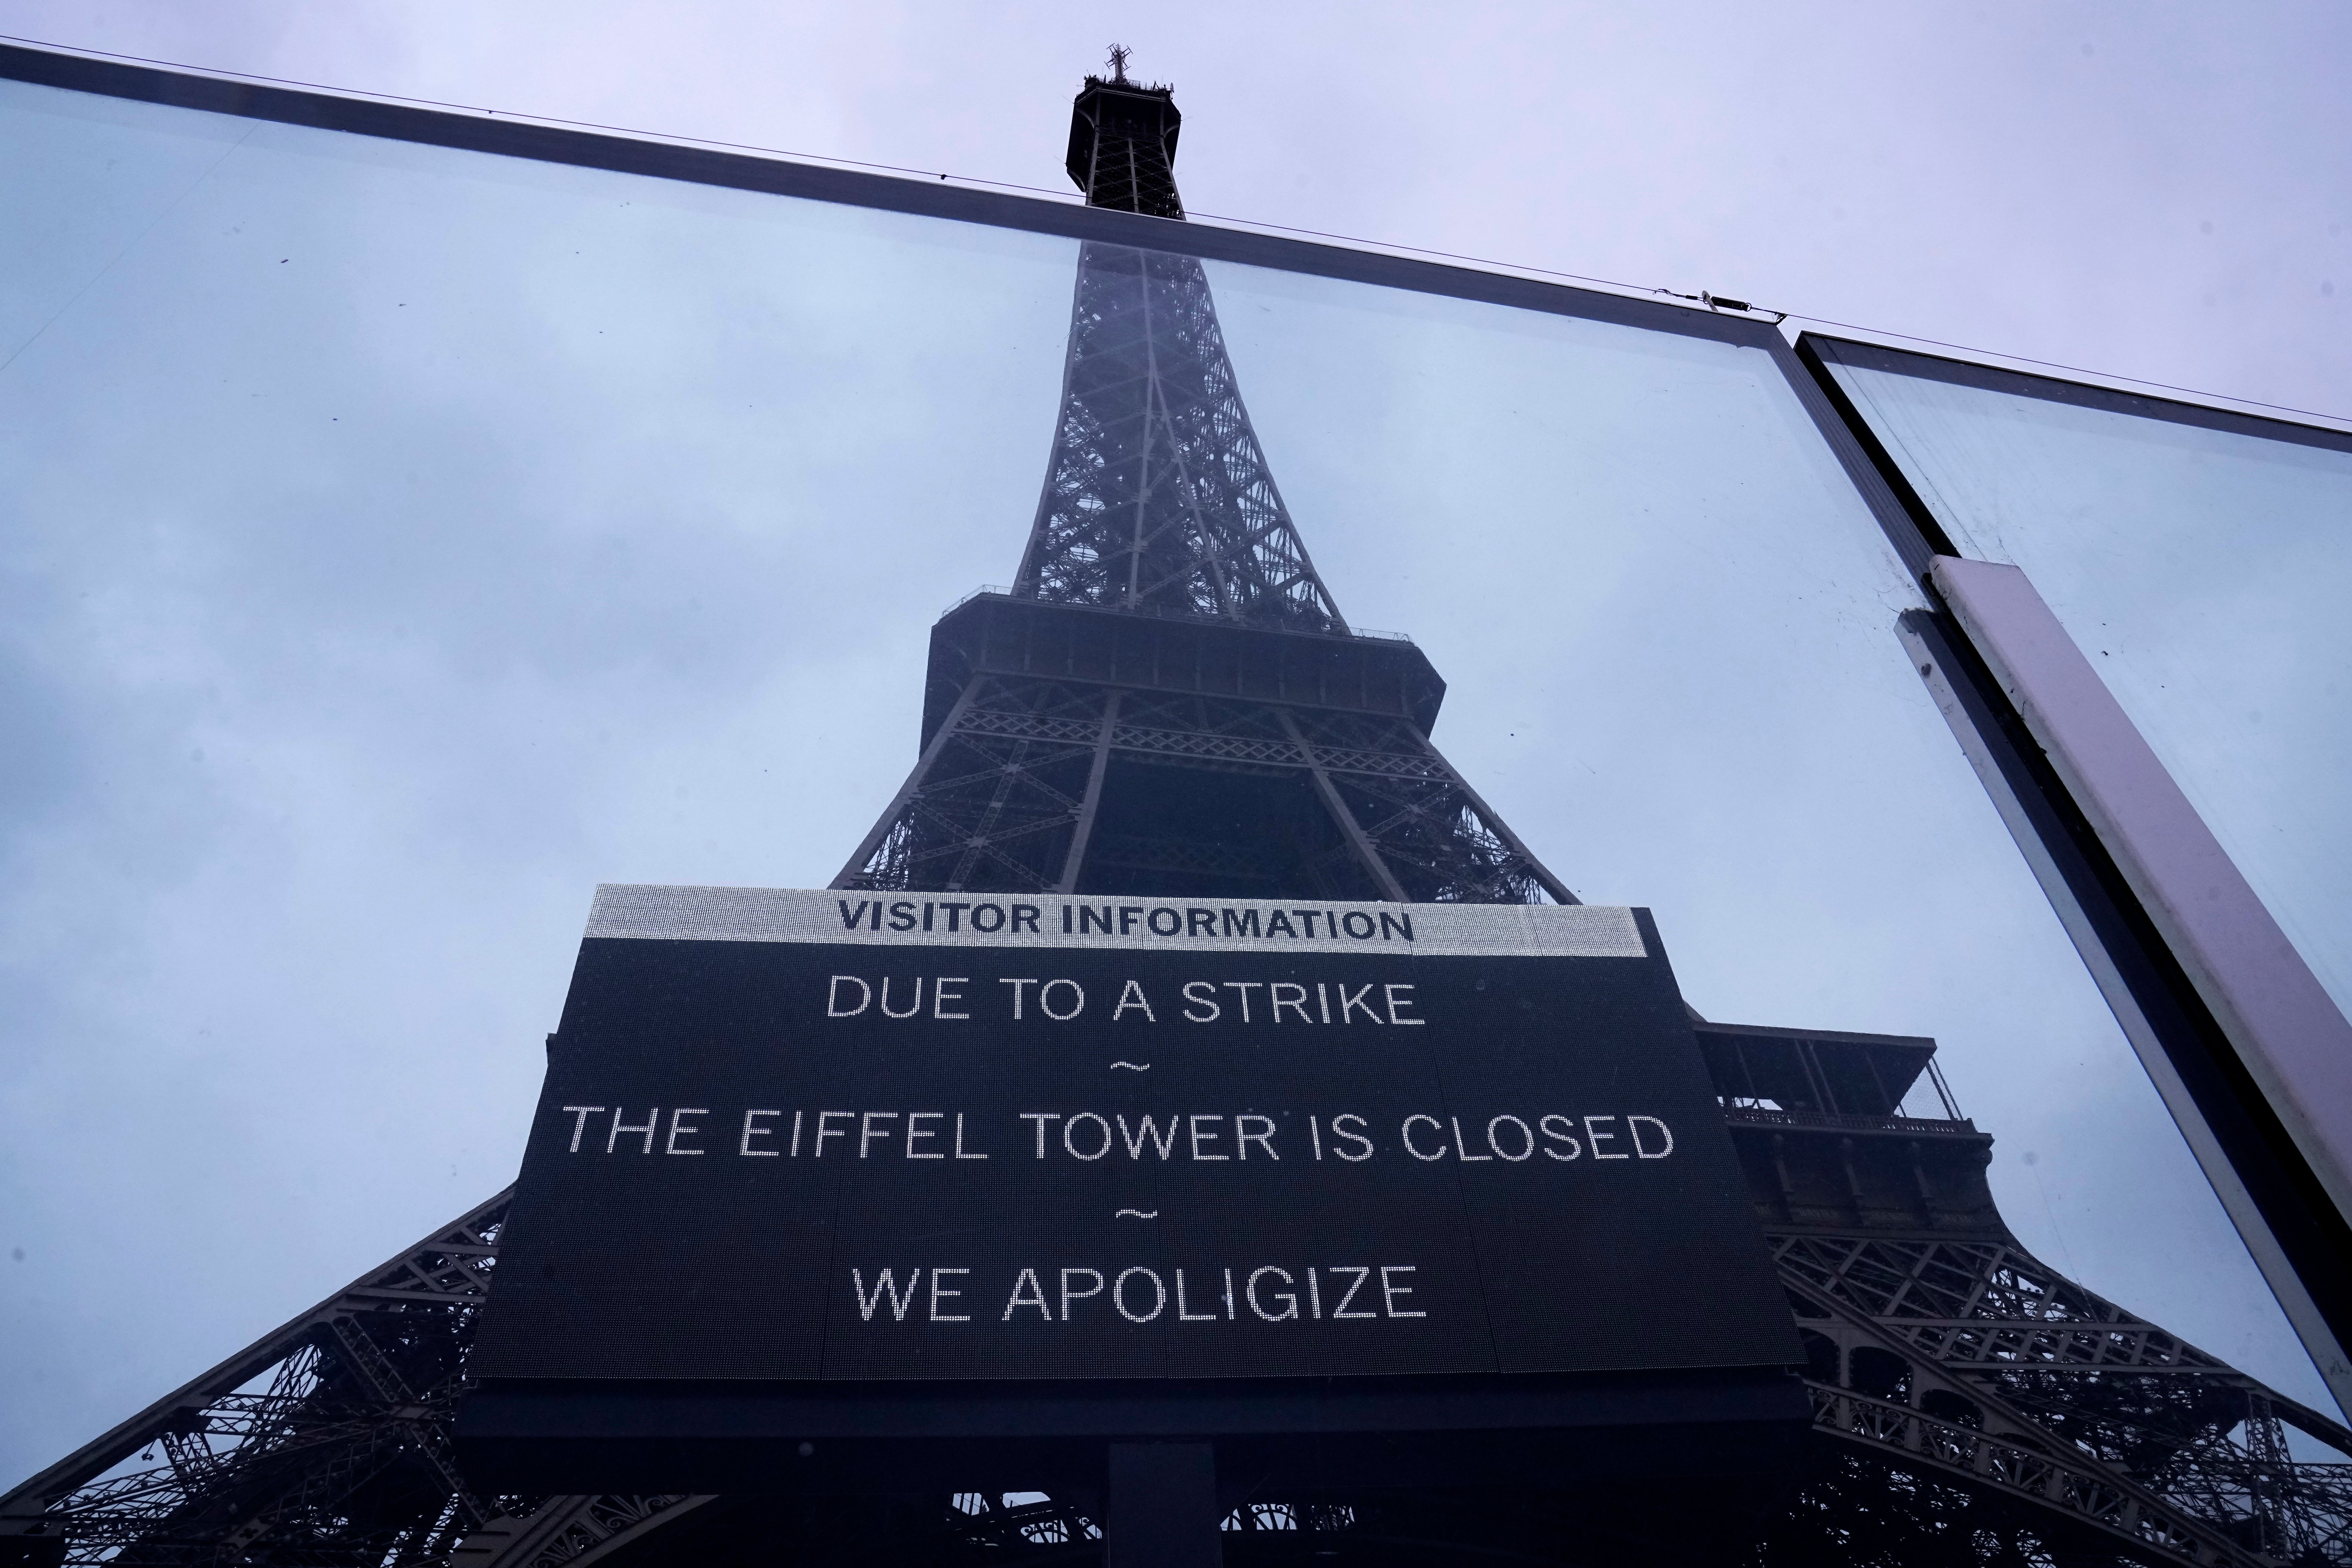 A board advertises a strike at the Eiffel Tower on Monday